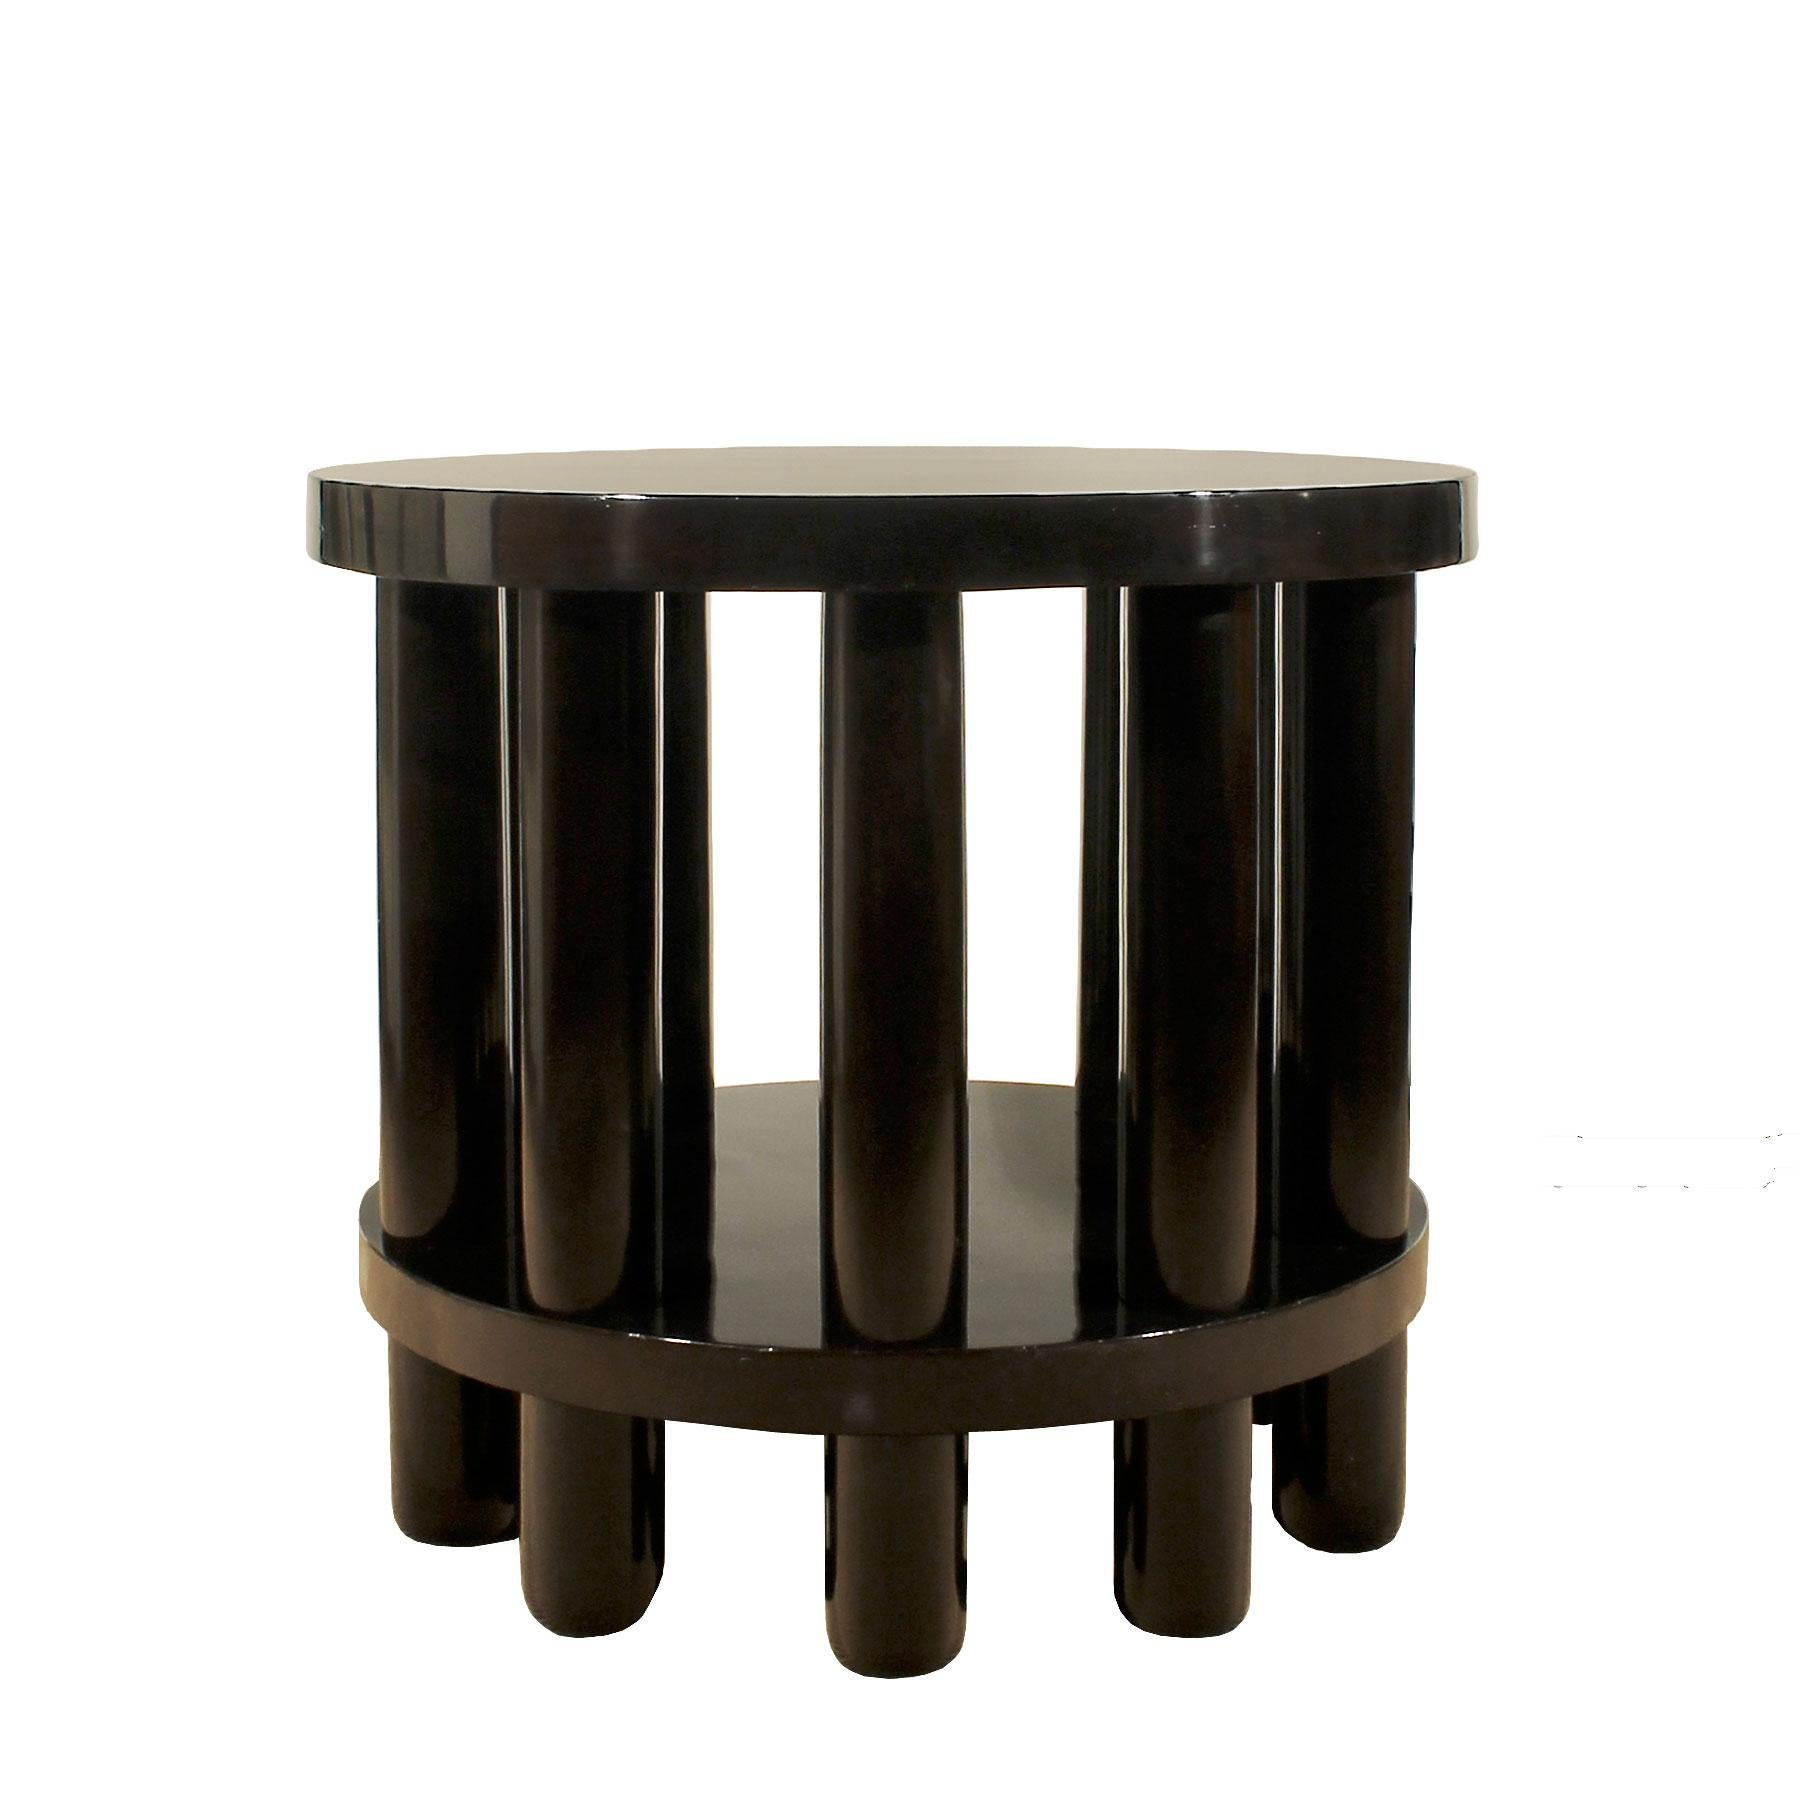 Spectacular center table with ten columns fixed by wood screw system, solid beech and pine wood with mahogany veneer, stained and French polished. High quality.
Design: Adolf Loos,
Austria, Vienna, circa 1900.